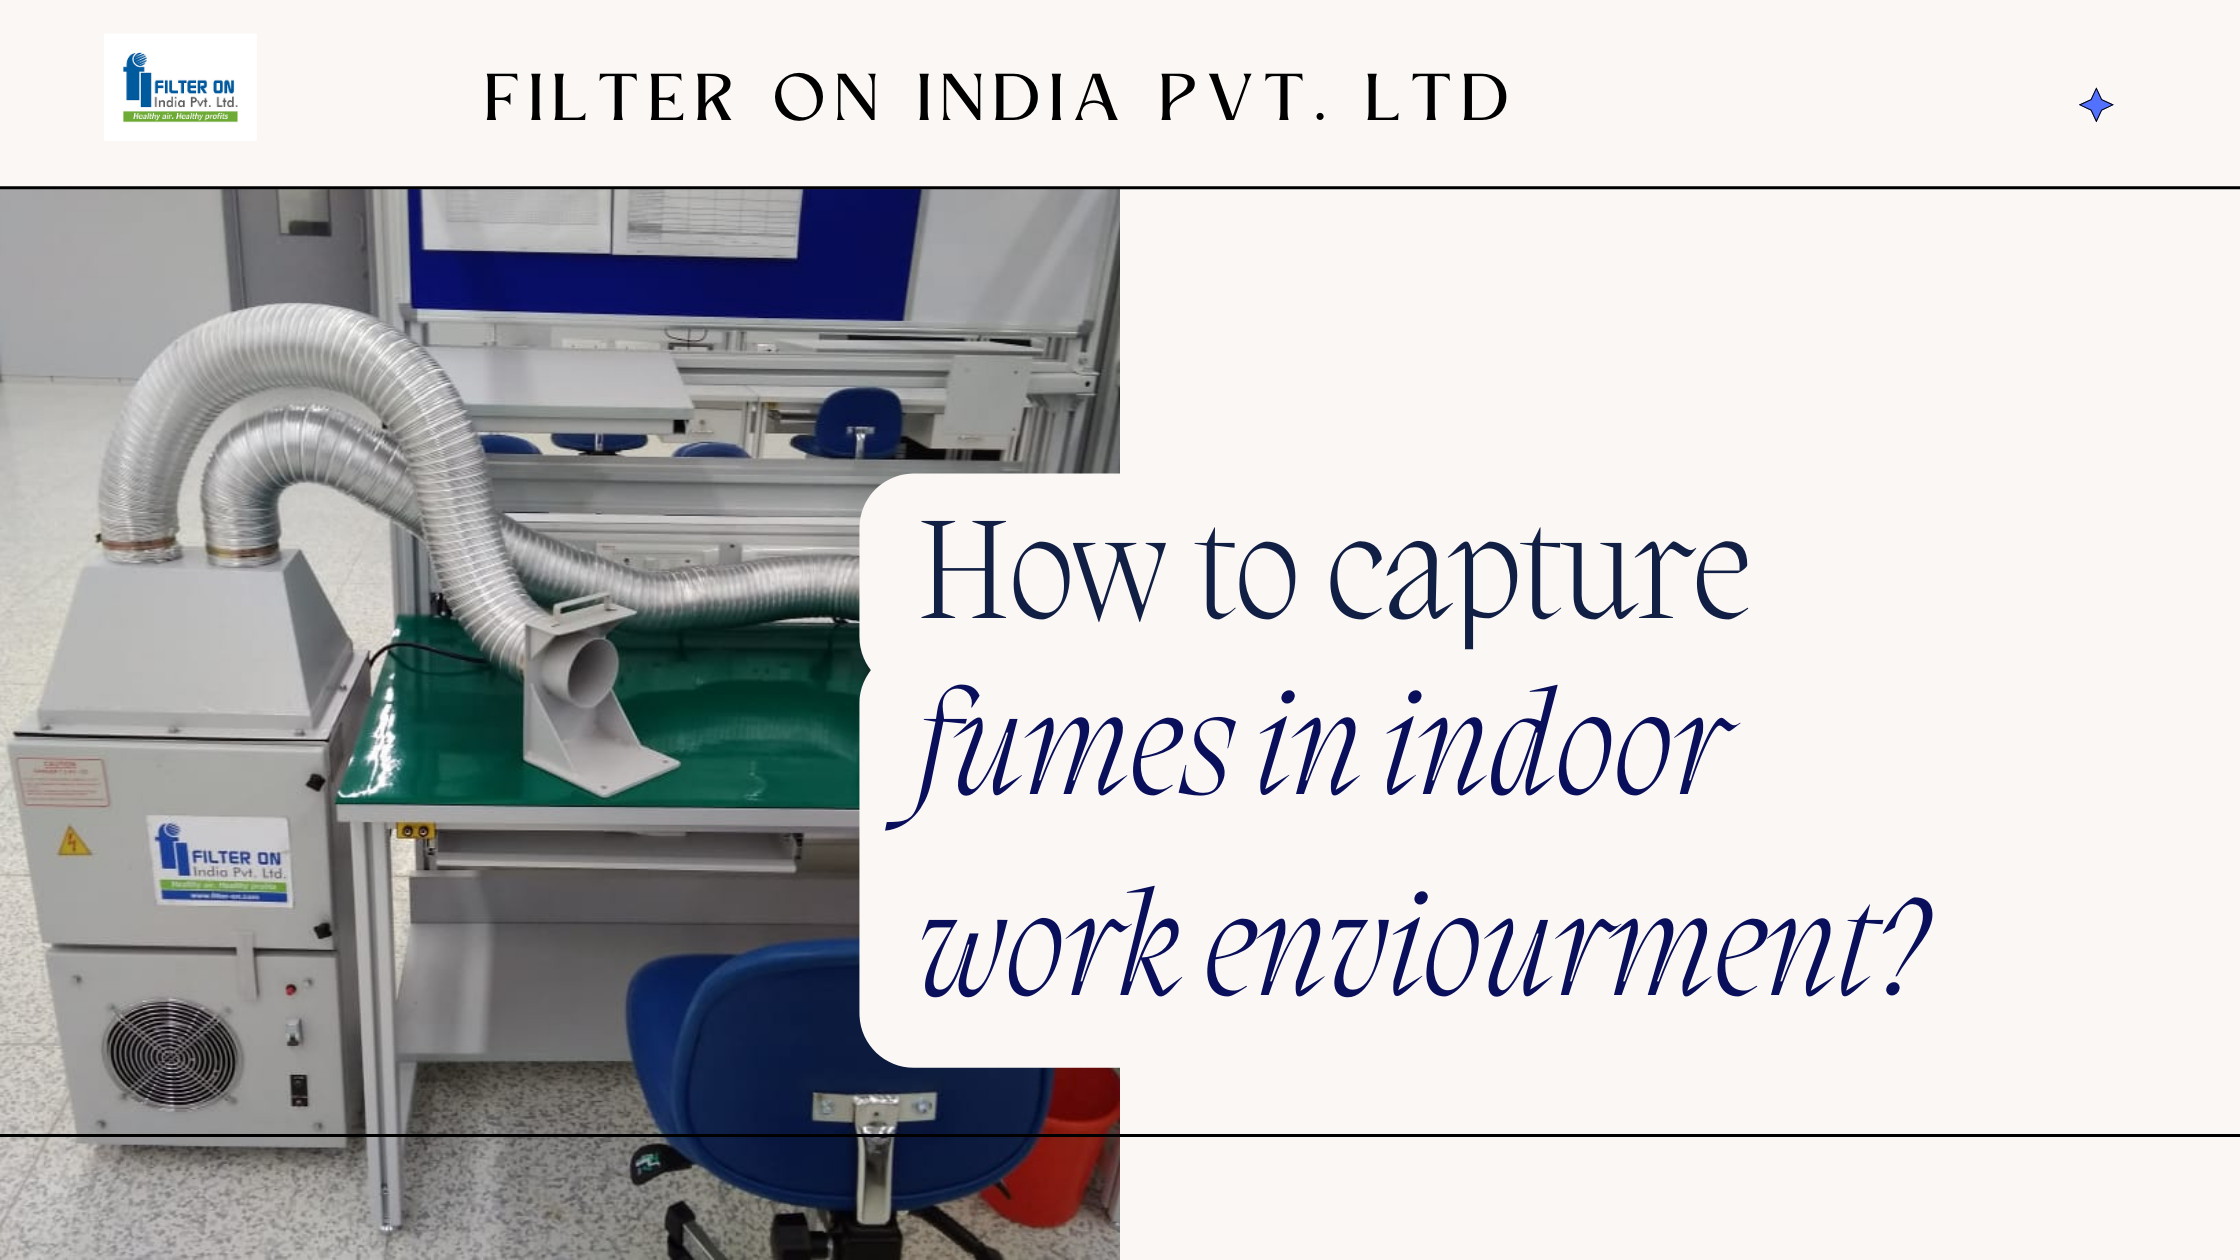 How to capture fumes in indoor work environment?